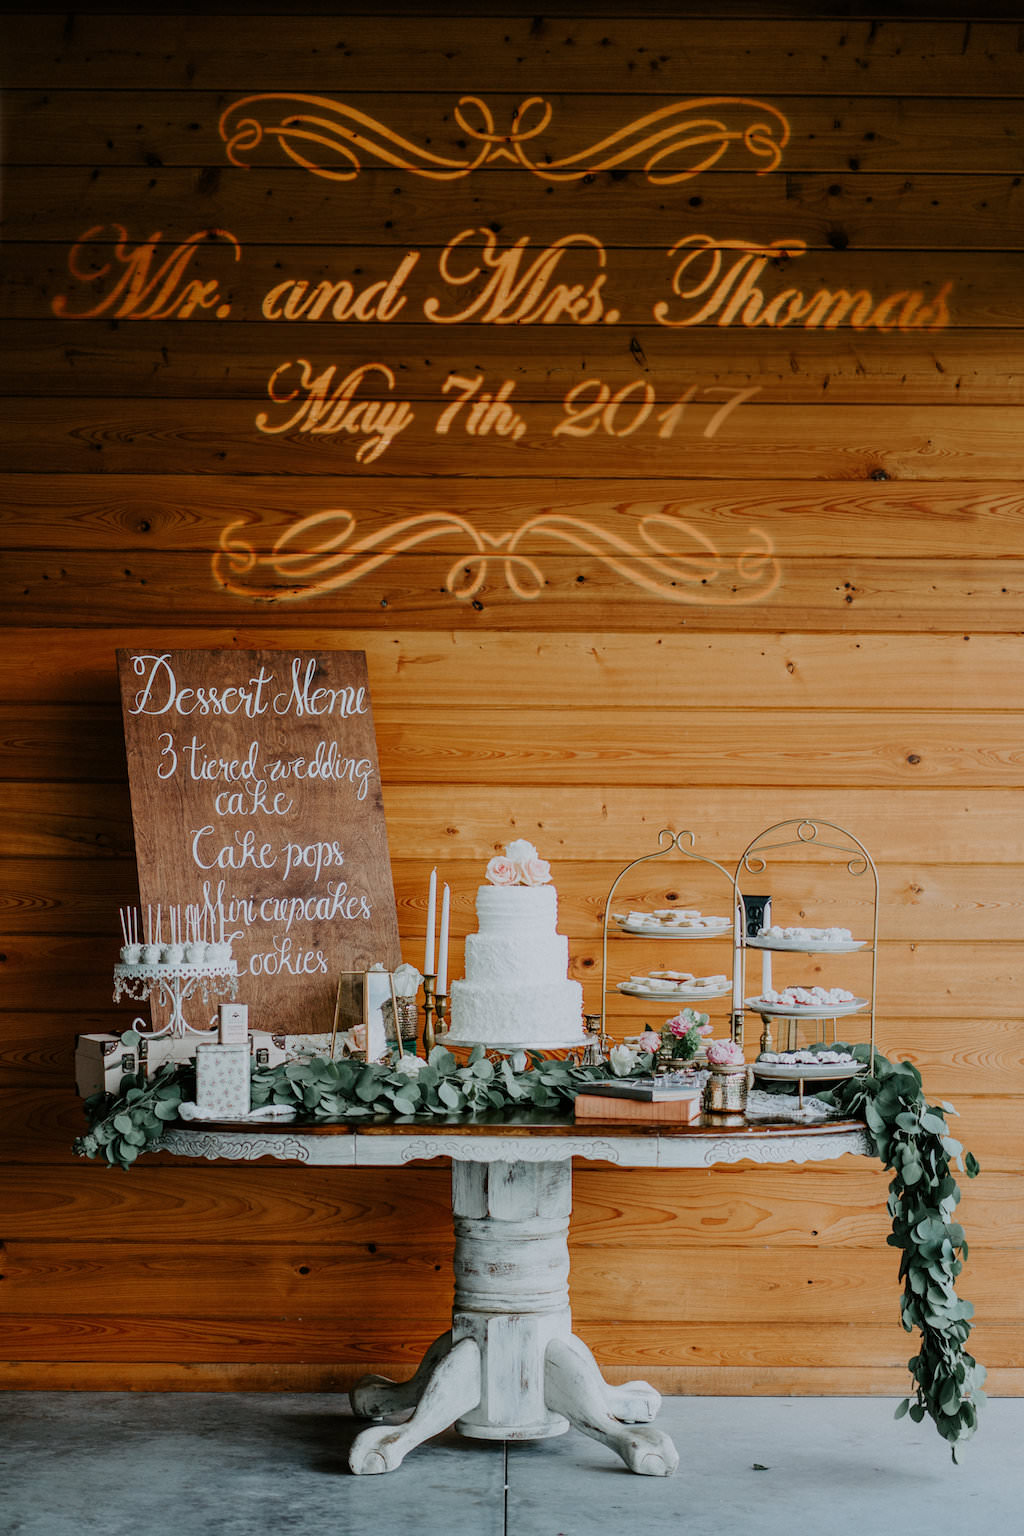 Elegant Rustic Barn Wedding Dessert Table Decor with Hand-painted Wooden Sign and Wall Decal, Three Tier Round White Wedding Cake, and Dessert Trays and Leafy Garland | Tampa Bay Wedding Planner Kelly Kennedy Weddings and Events